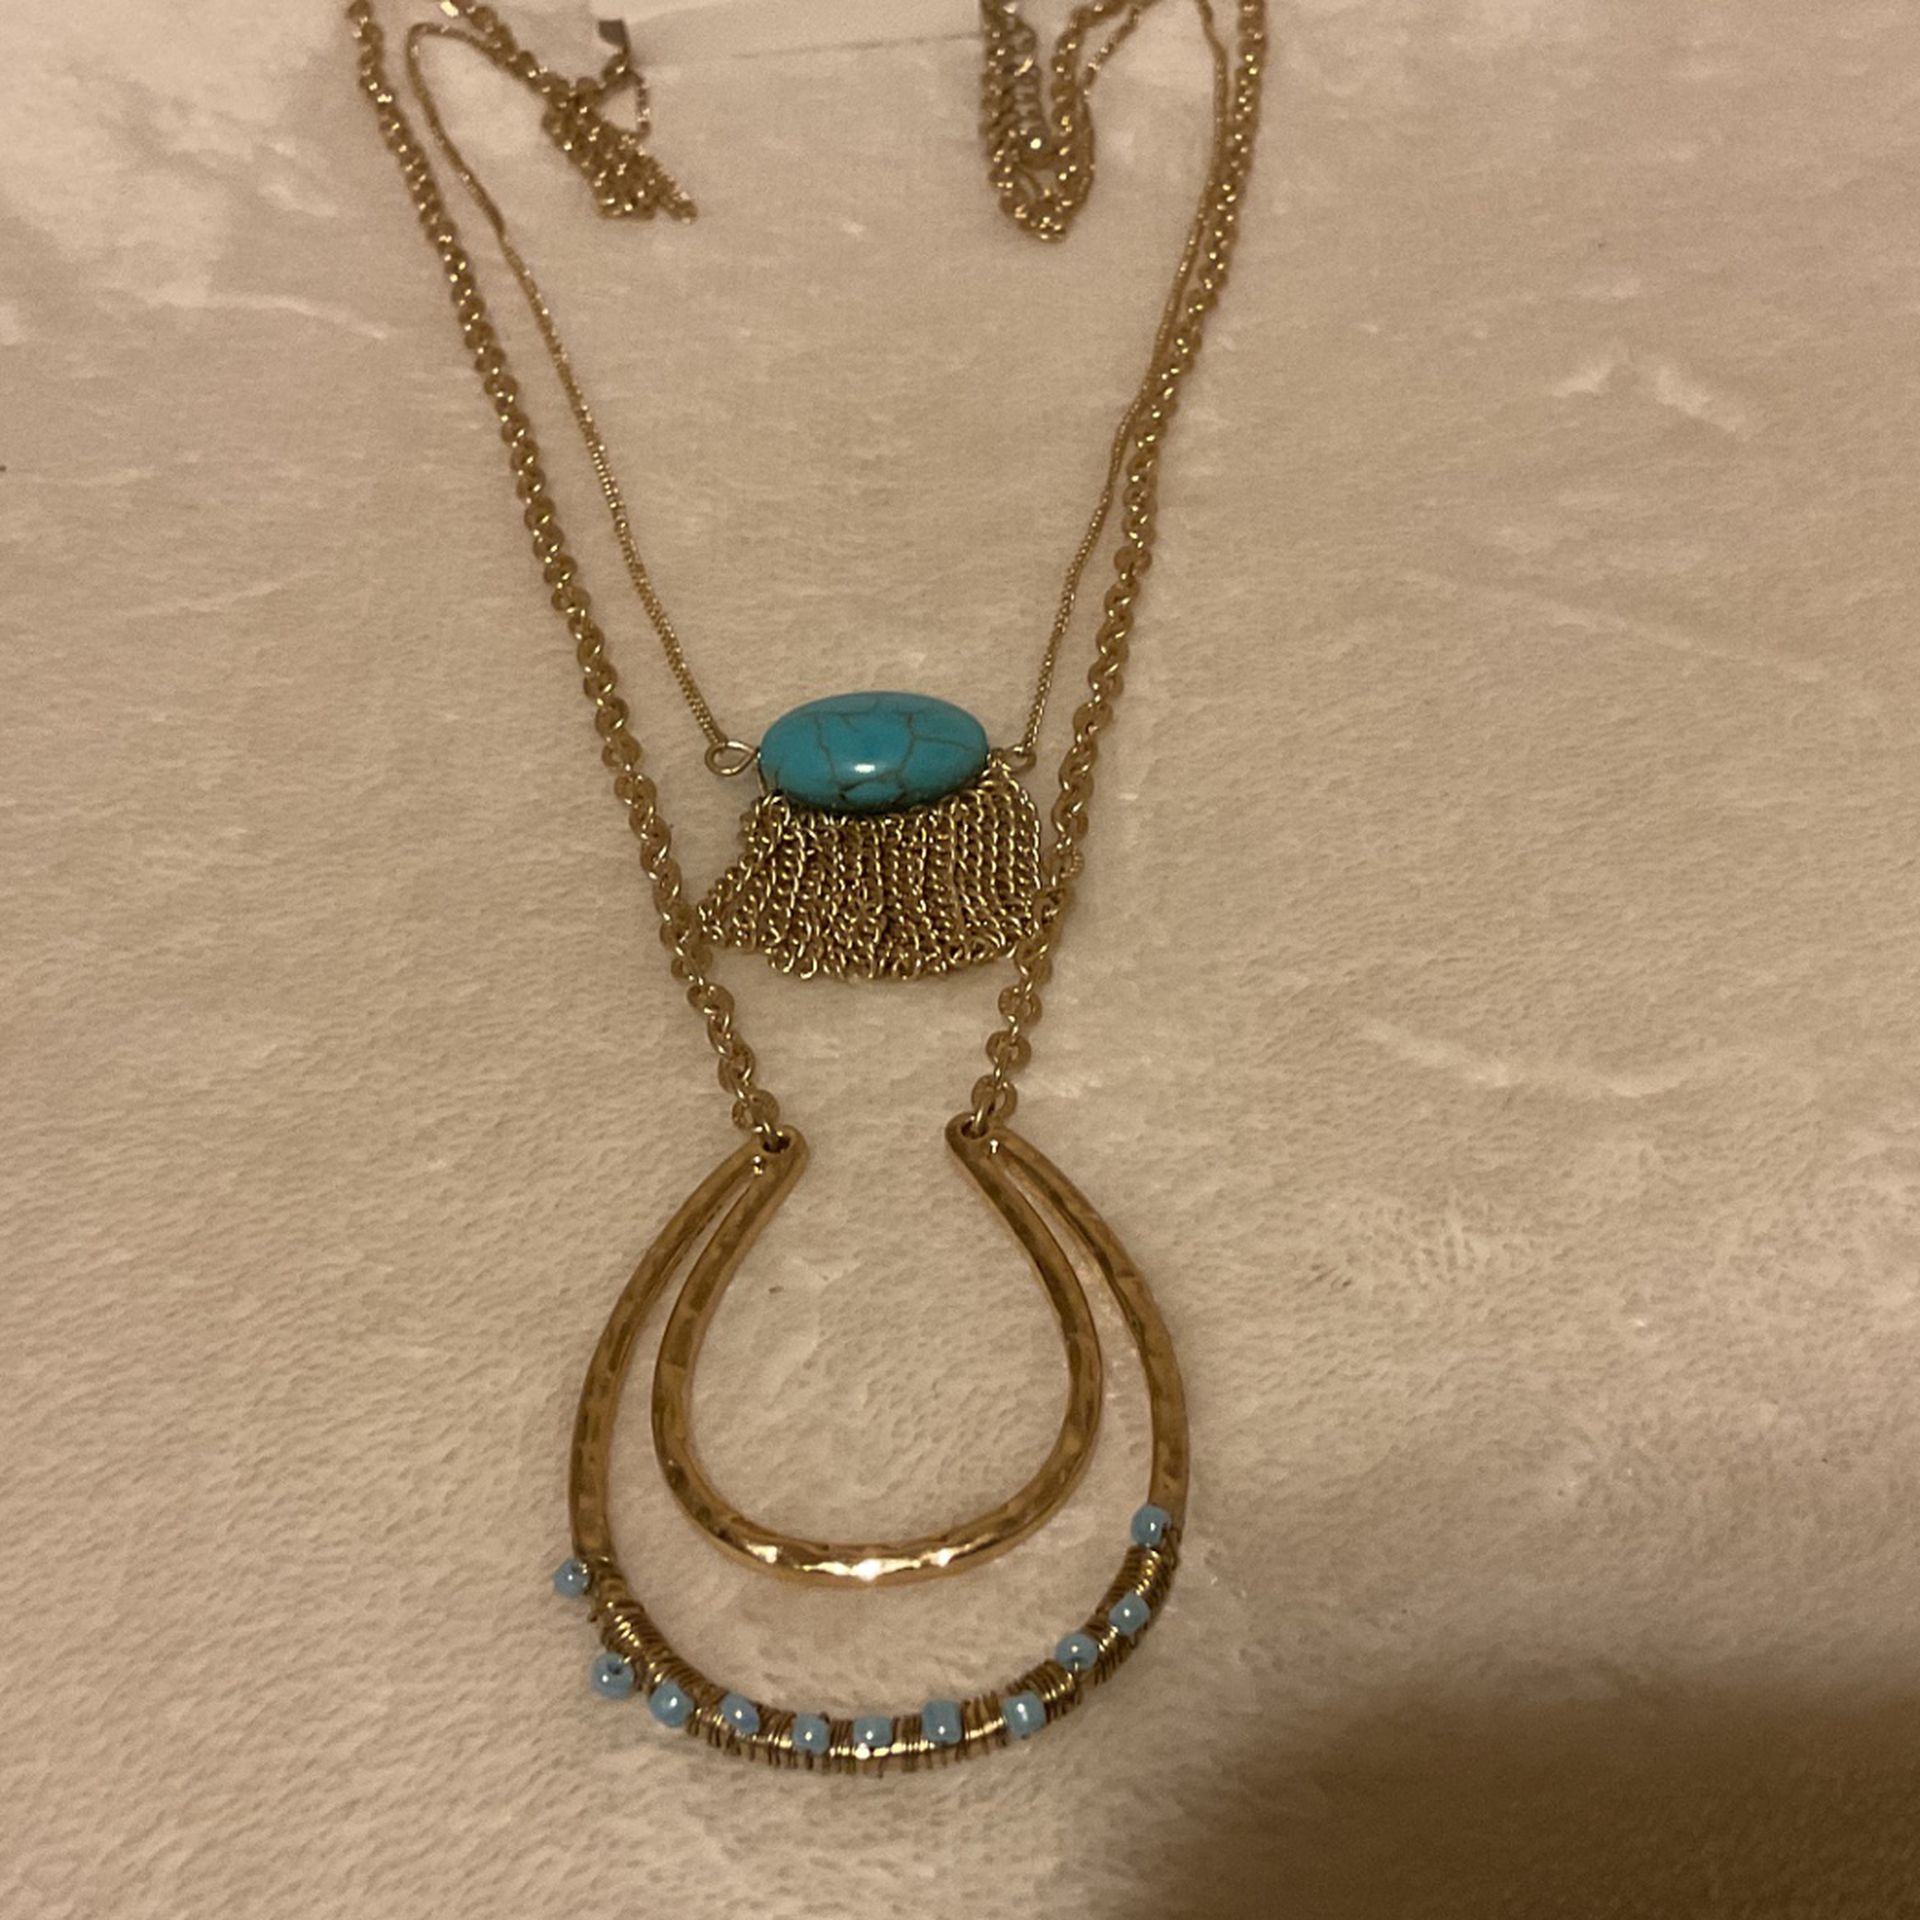 20” Goldtone Double Strand Necklace With Turquoise Stone Pendant…Matching Cuff Bracelet & Ring